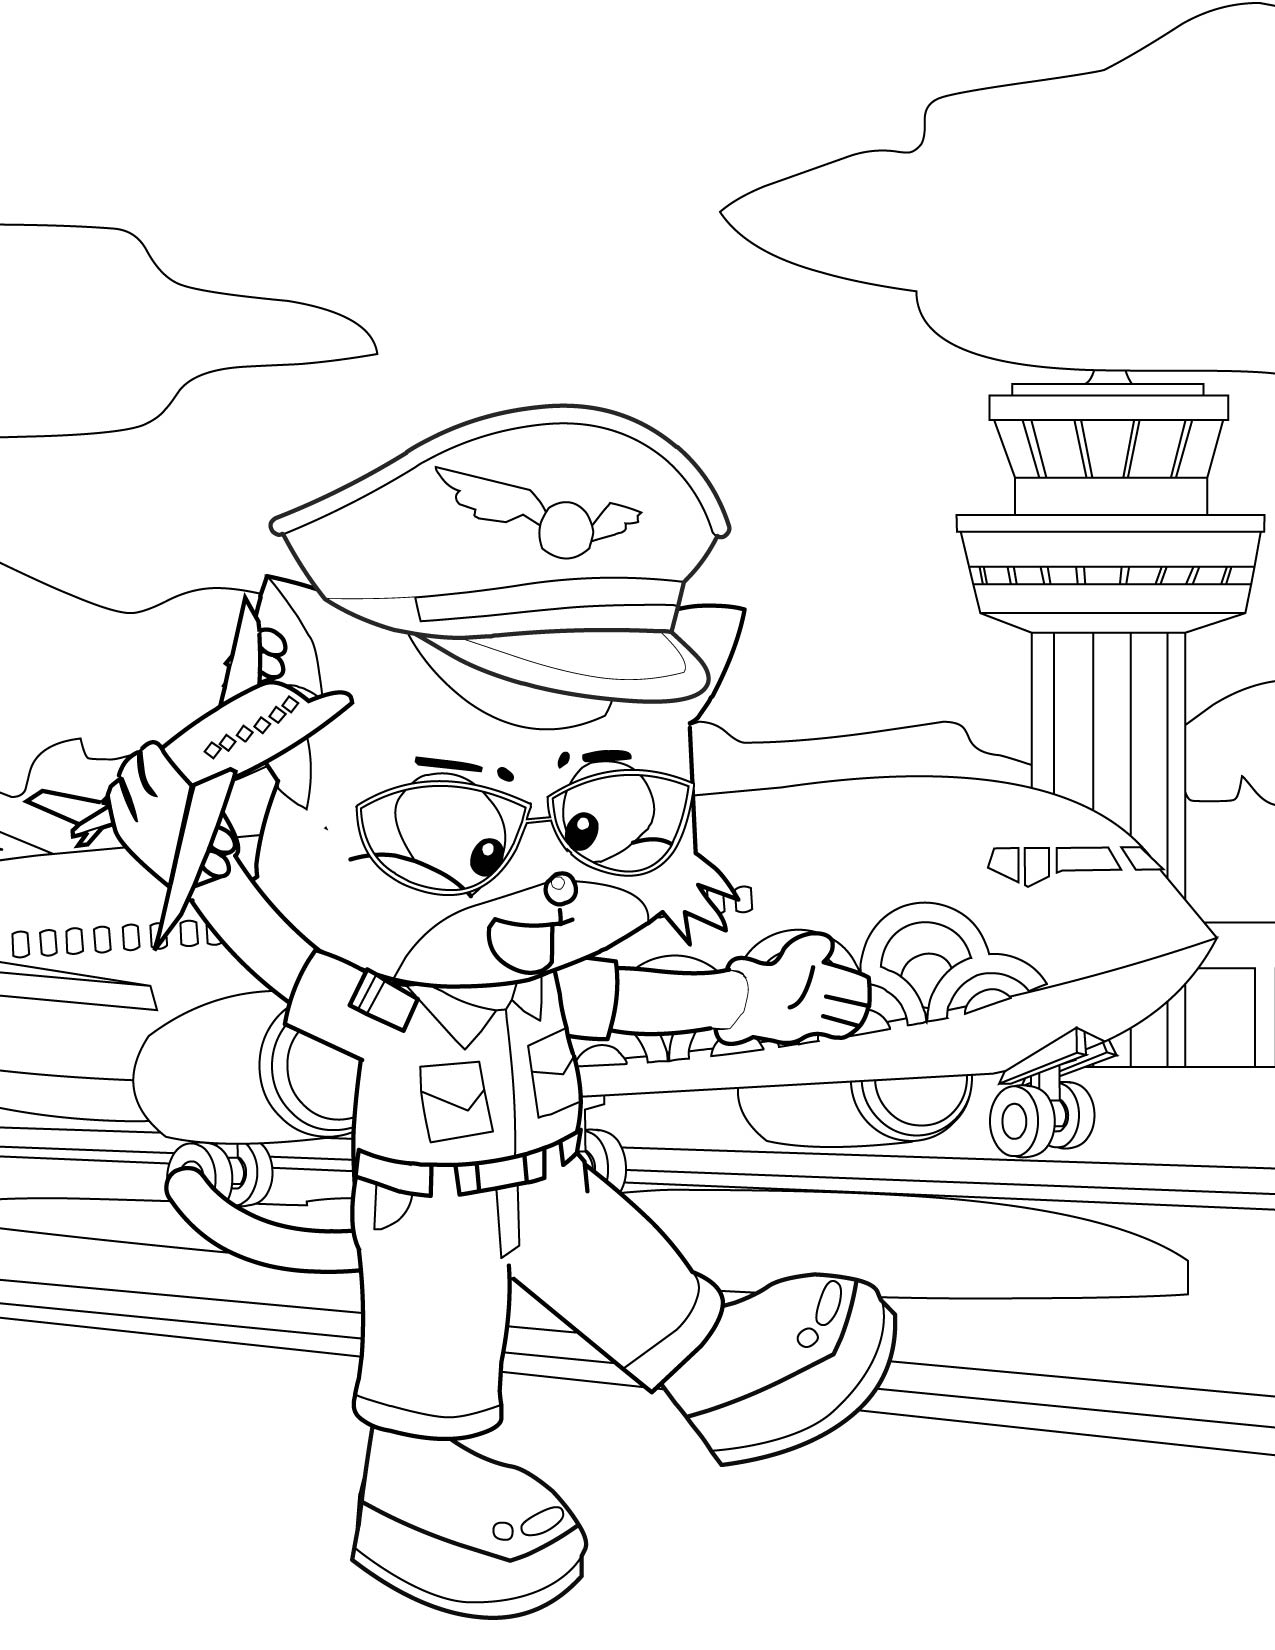 Airplane Pilot Coloring Page Handipoints Pages